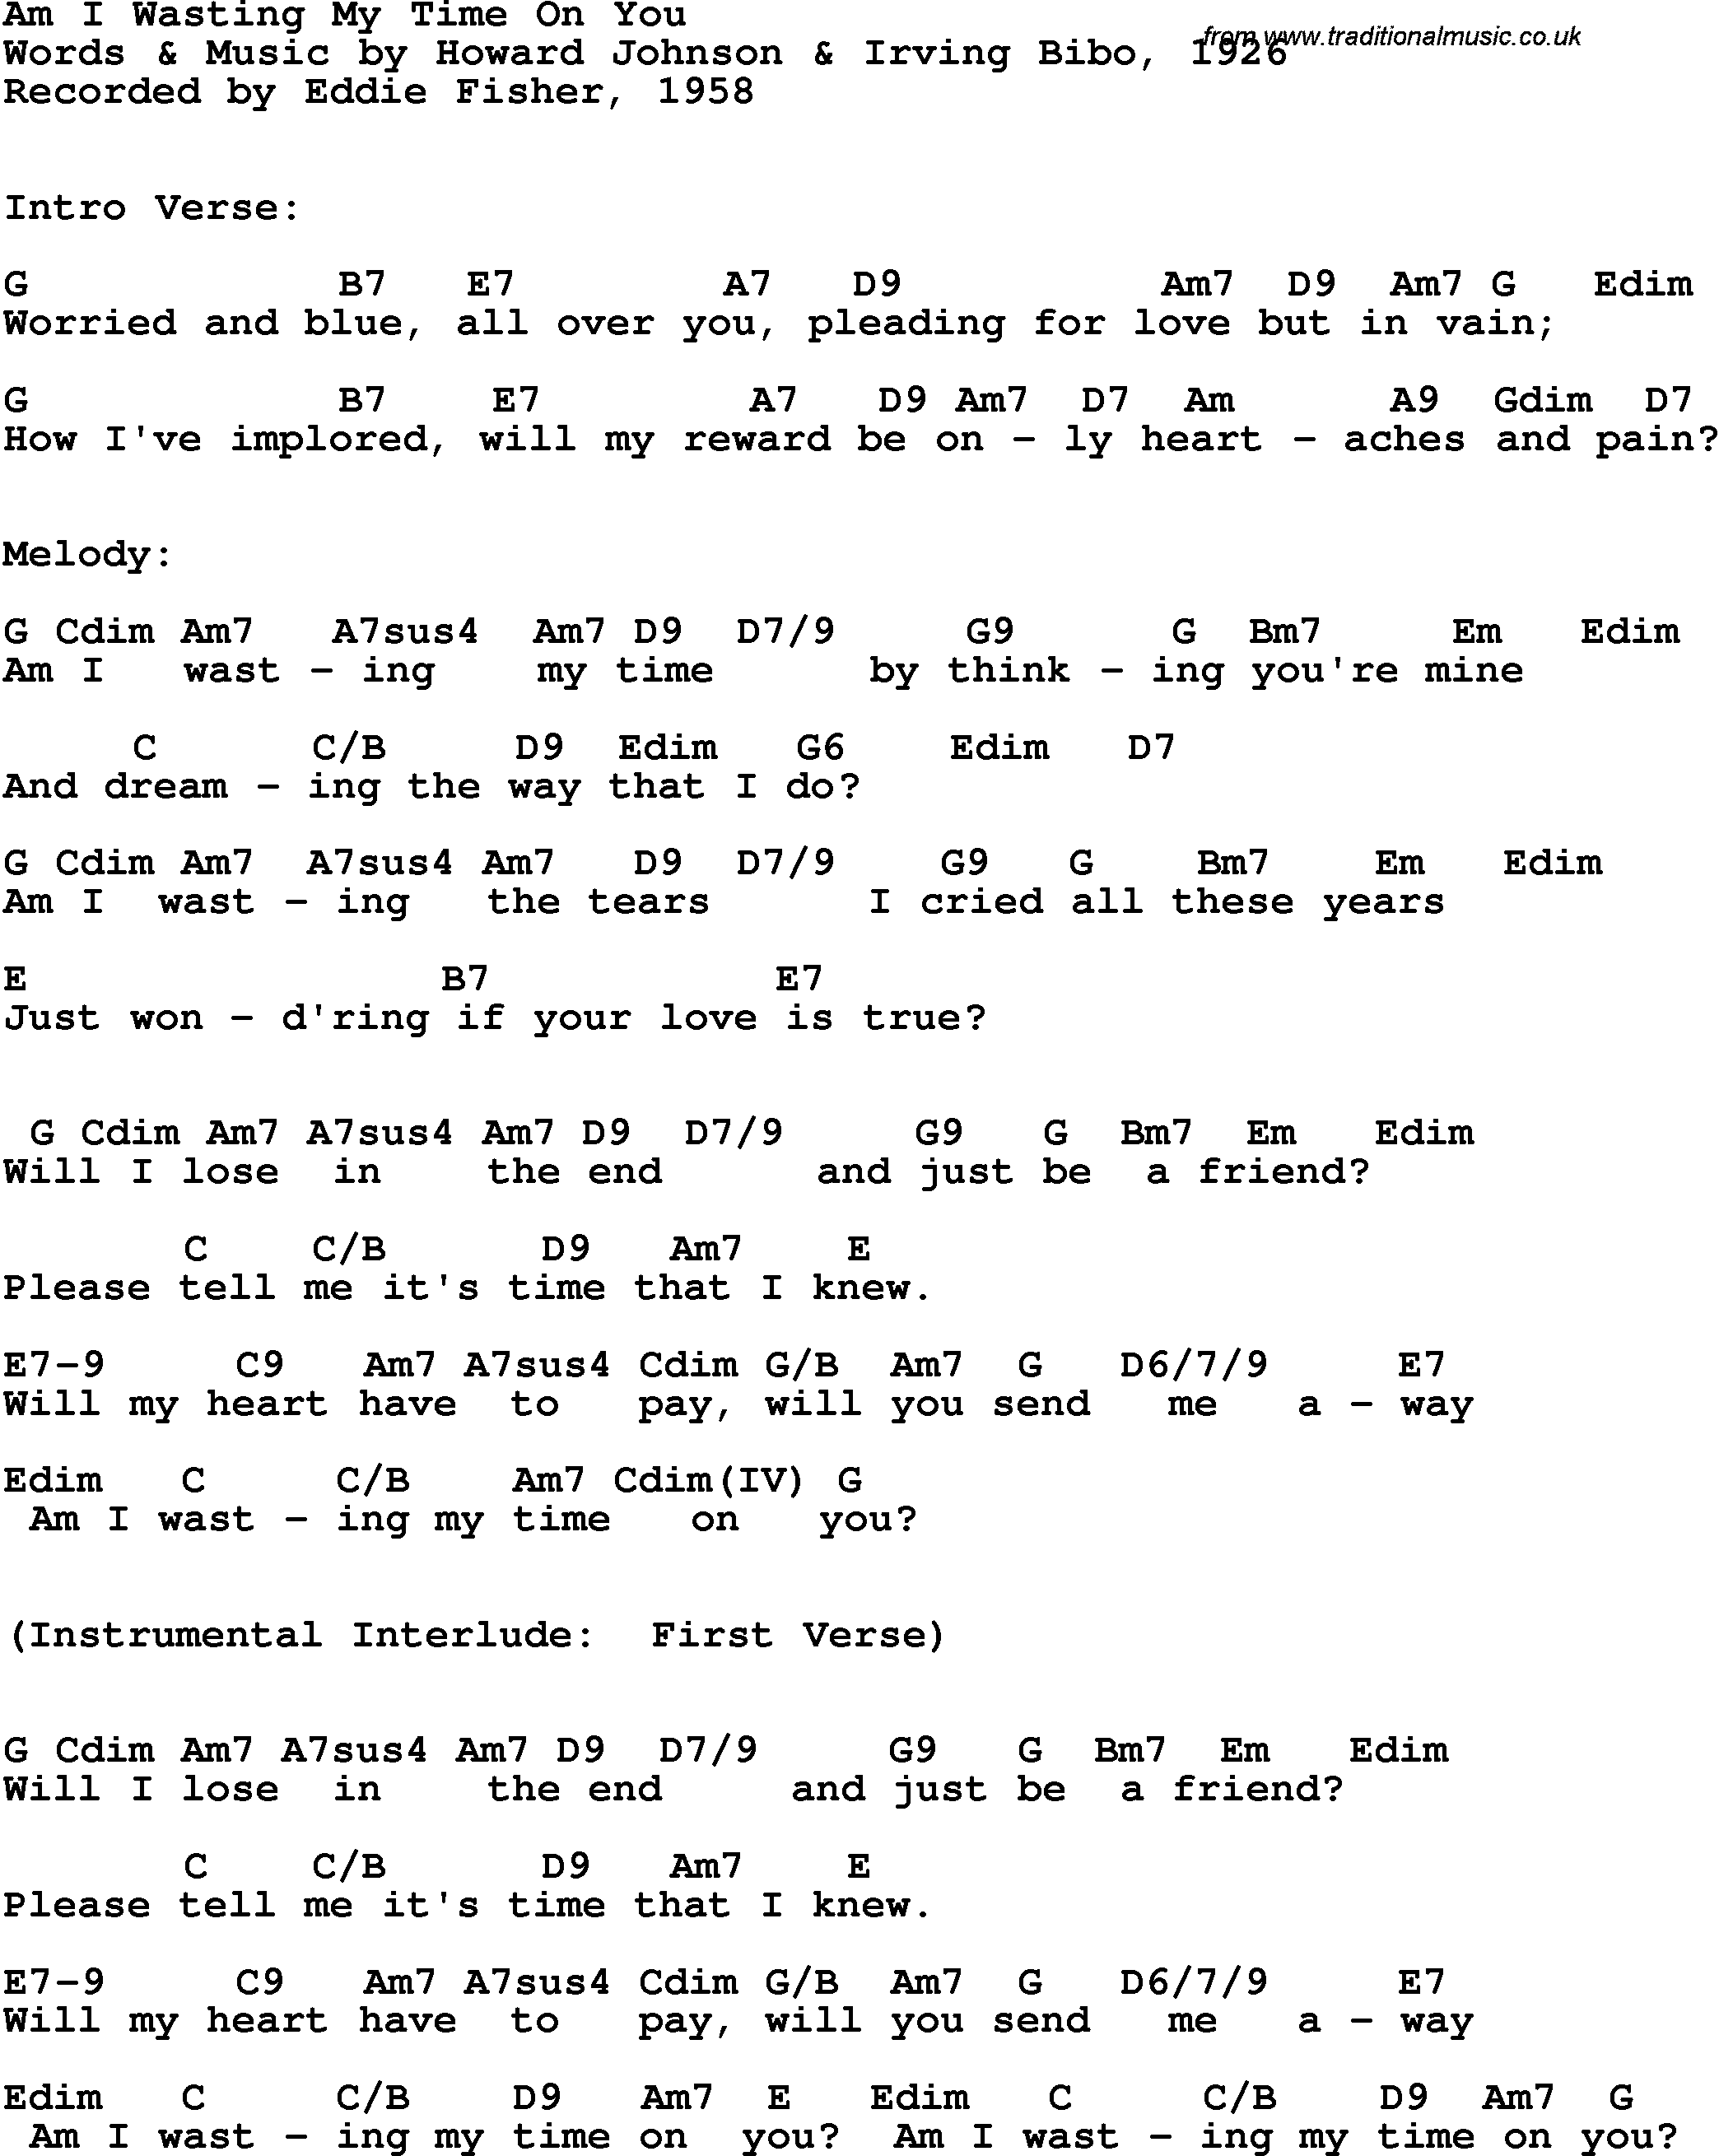 Song Lyrics with guitar chords for Am I Wasting My Time On You - Eddie Fisher, 1958